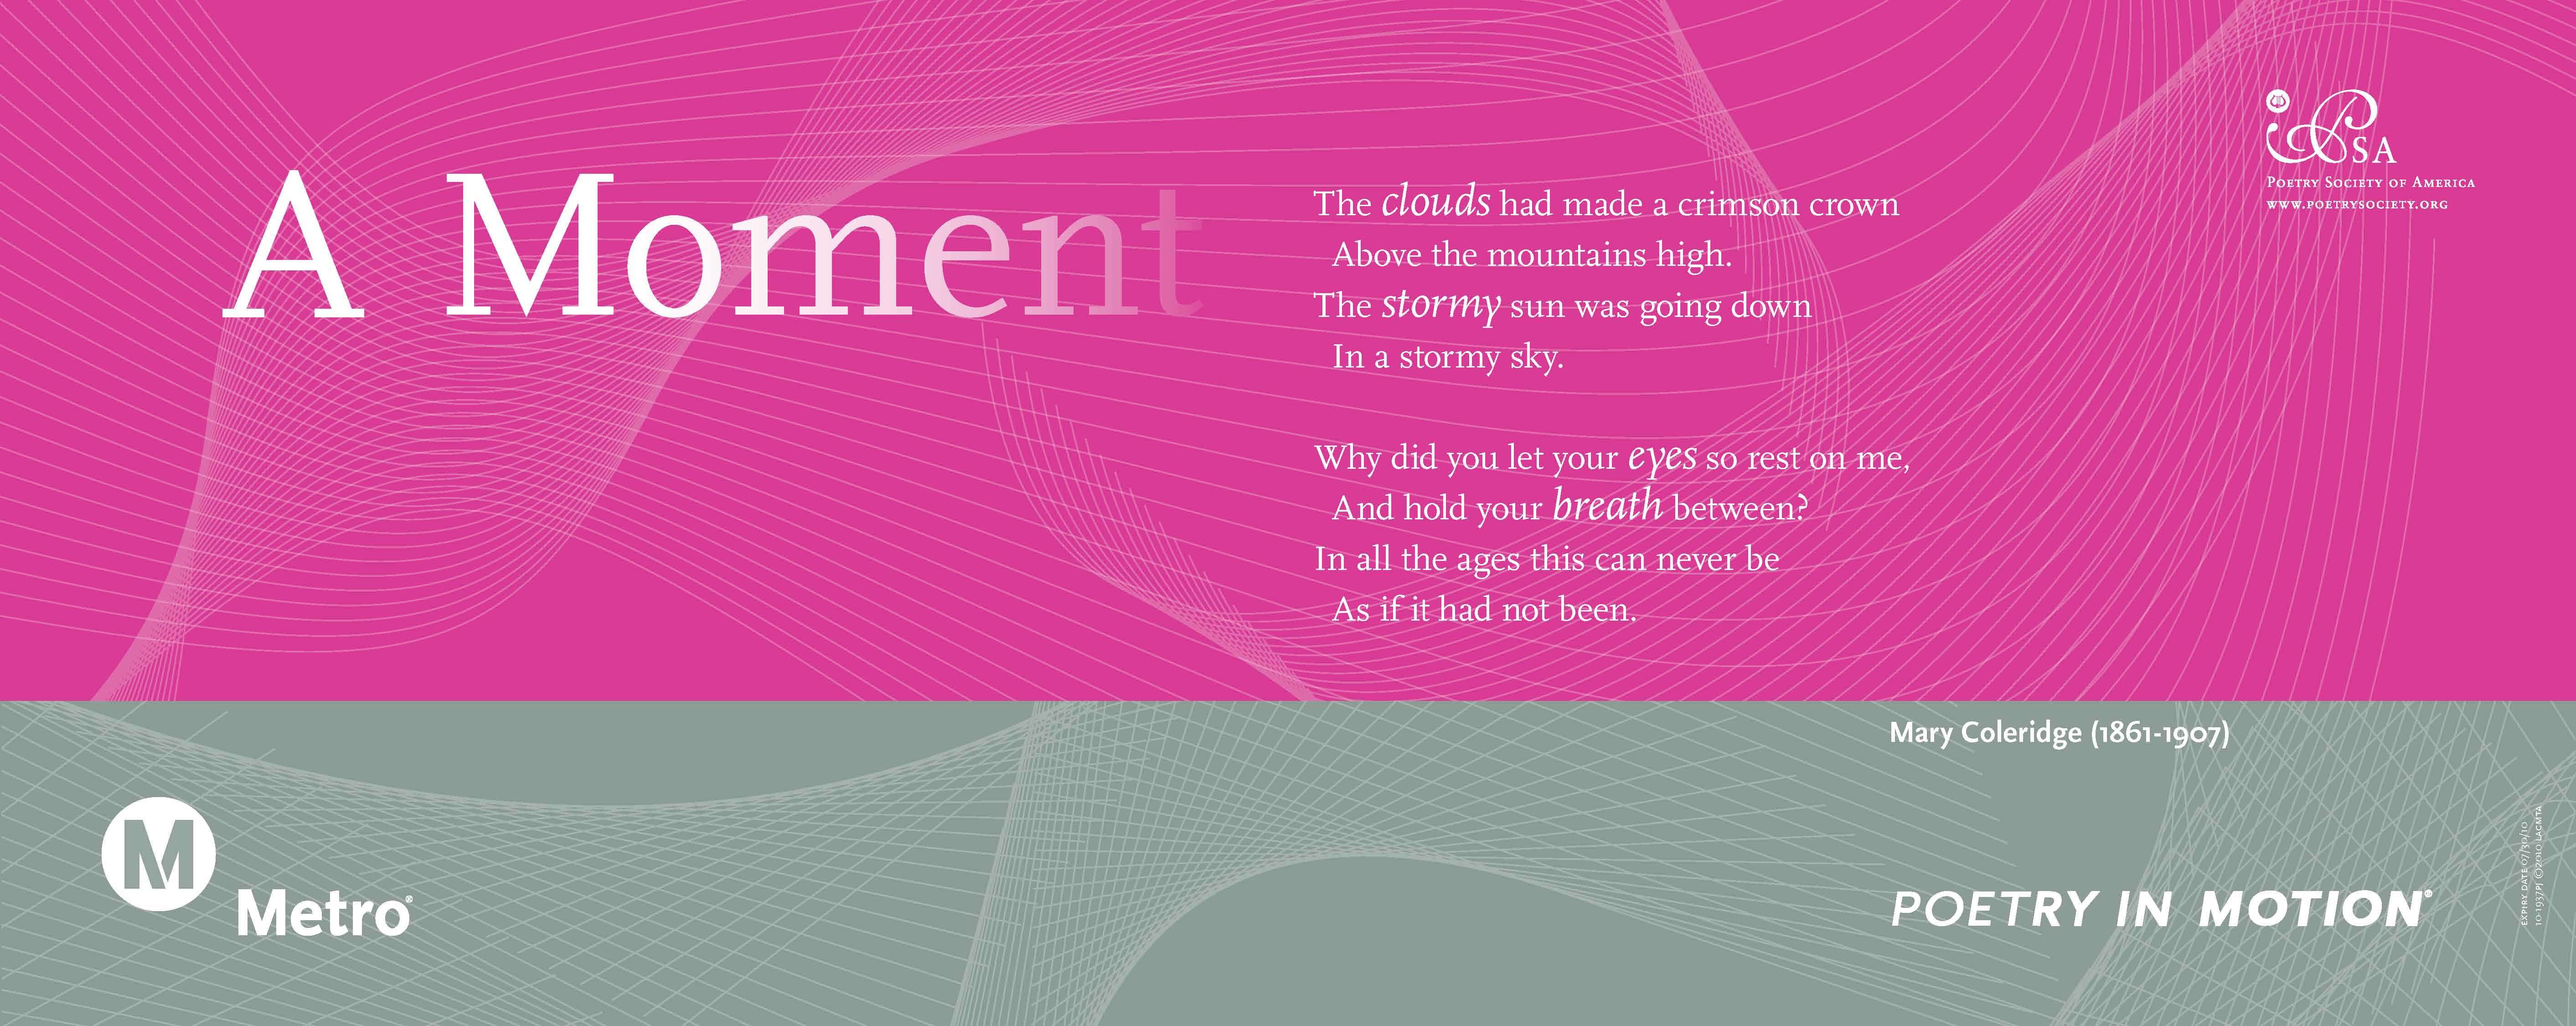 A vertical pink and gray poster features a poem titled A Moment, by Mary Coleridge.